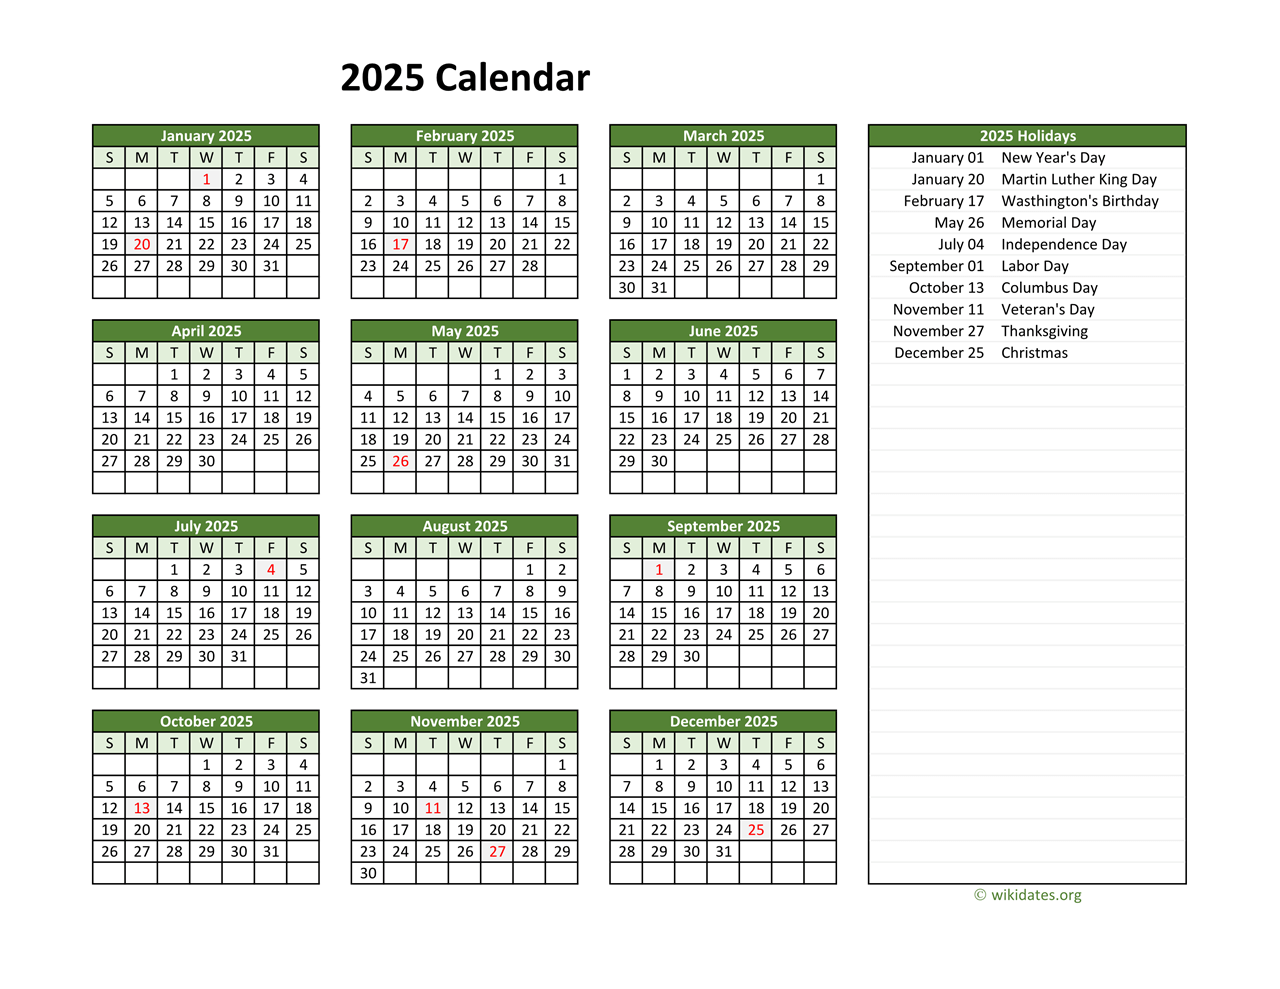 Printable 2025 Calendar with Federal Holidays WikiDates org